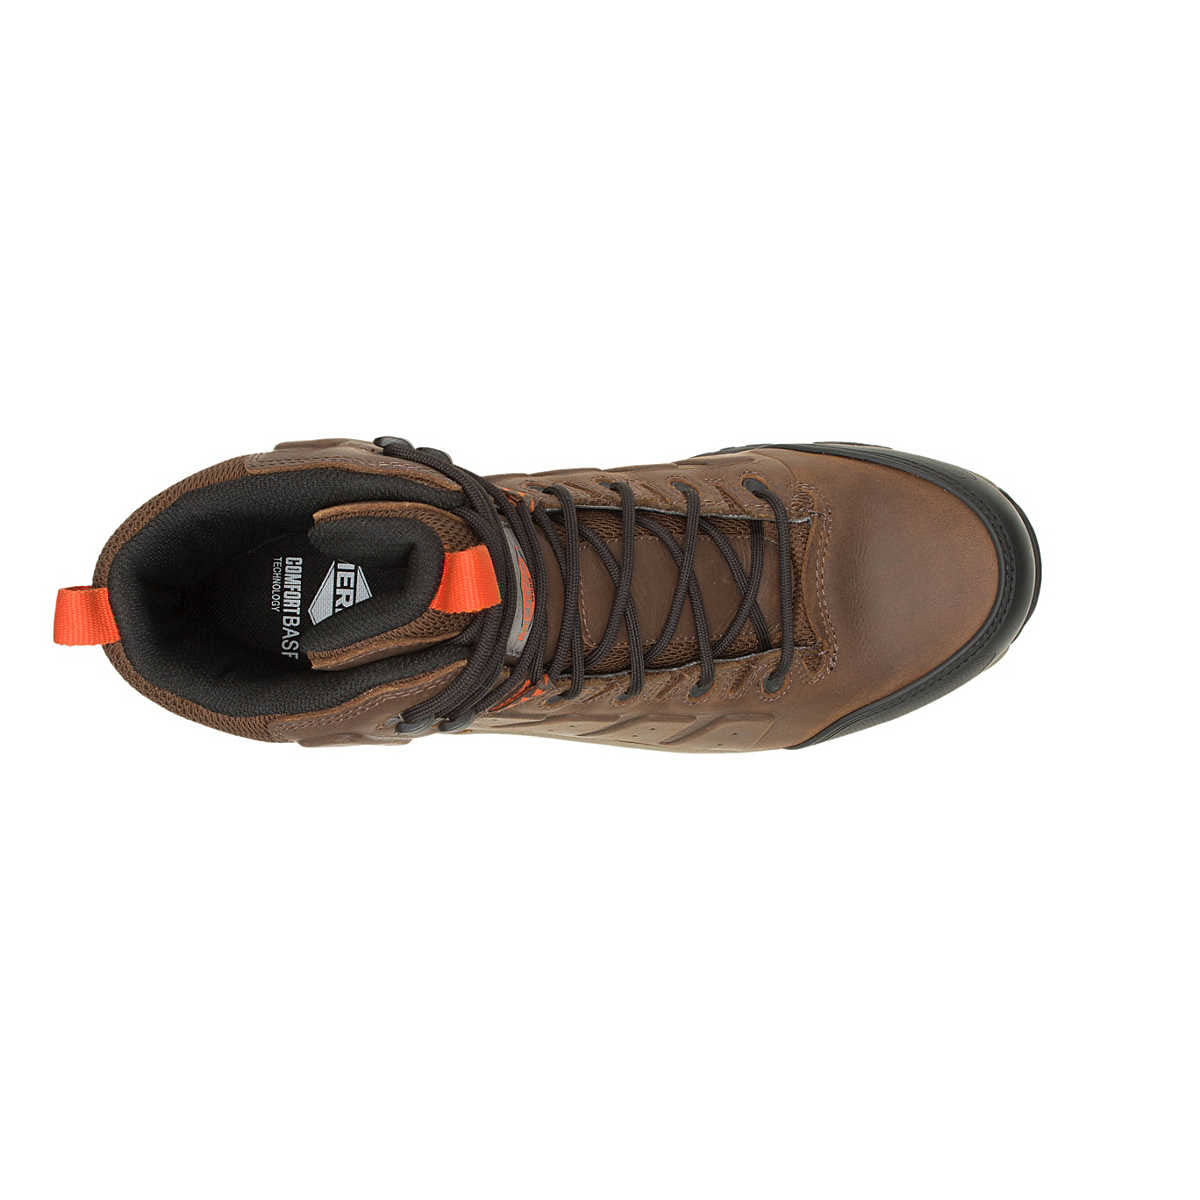 Top view of a brown Merrell Phaserbound 2 Mid Waterproof CF hiking boot with orange accents and laces on a white background.